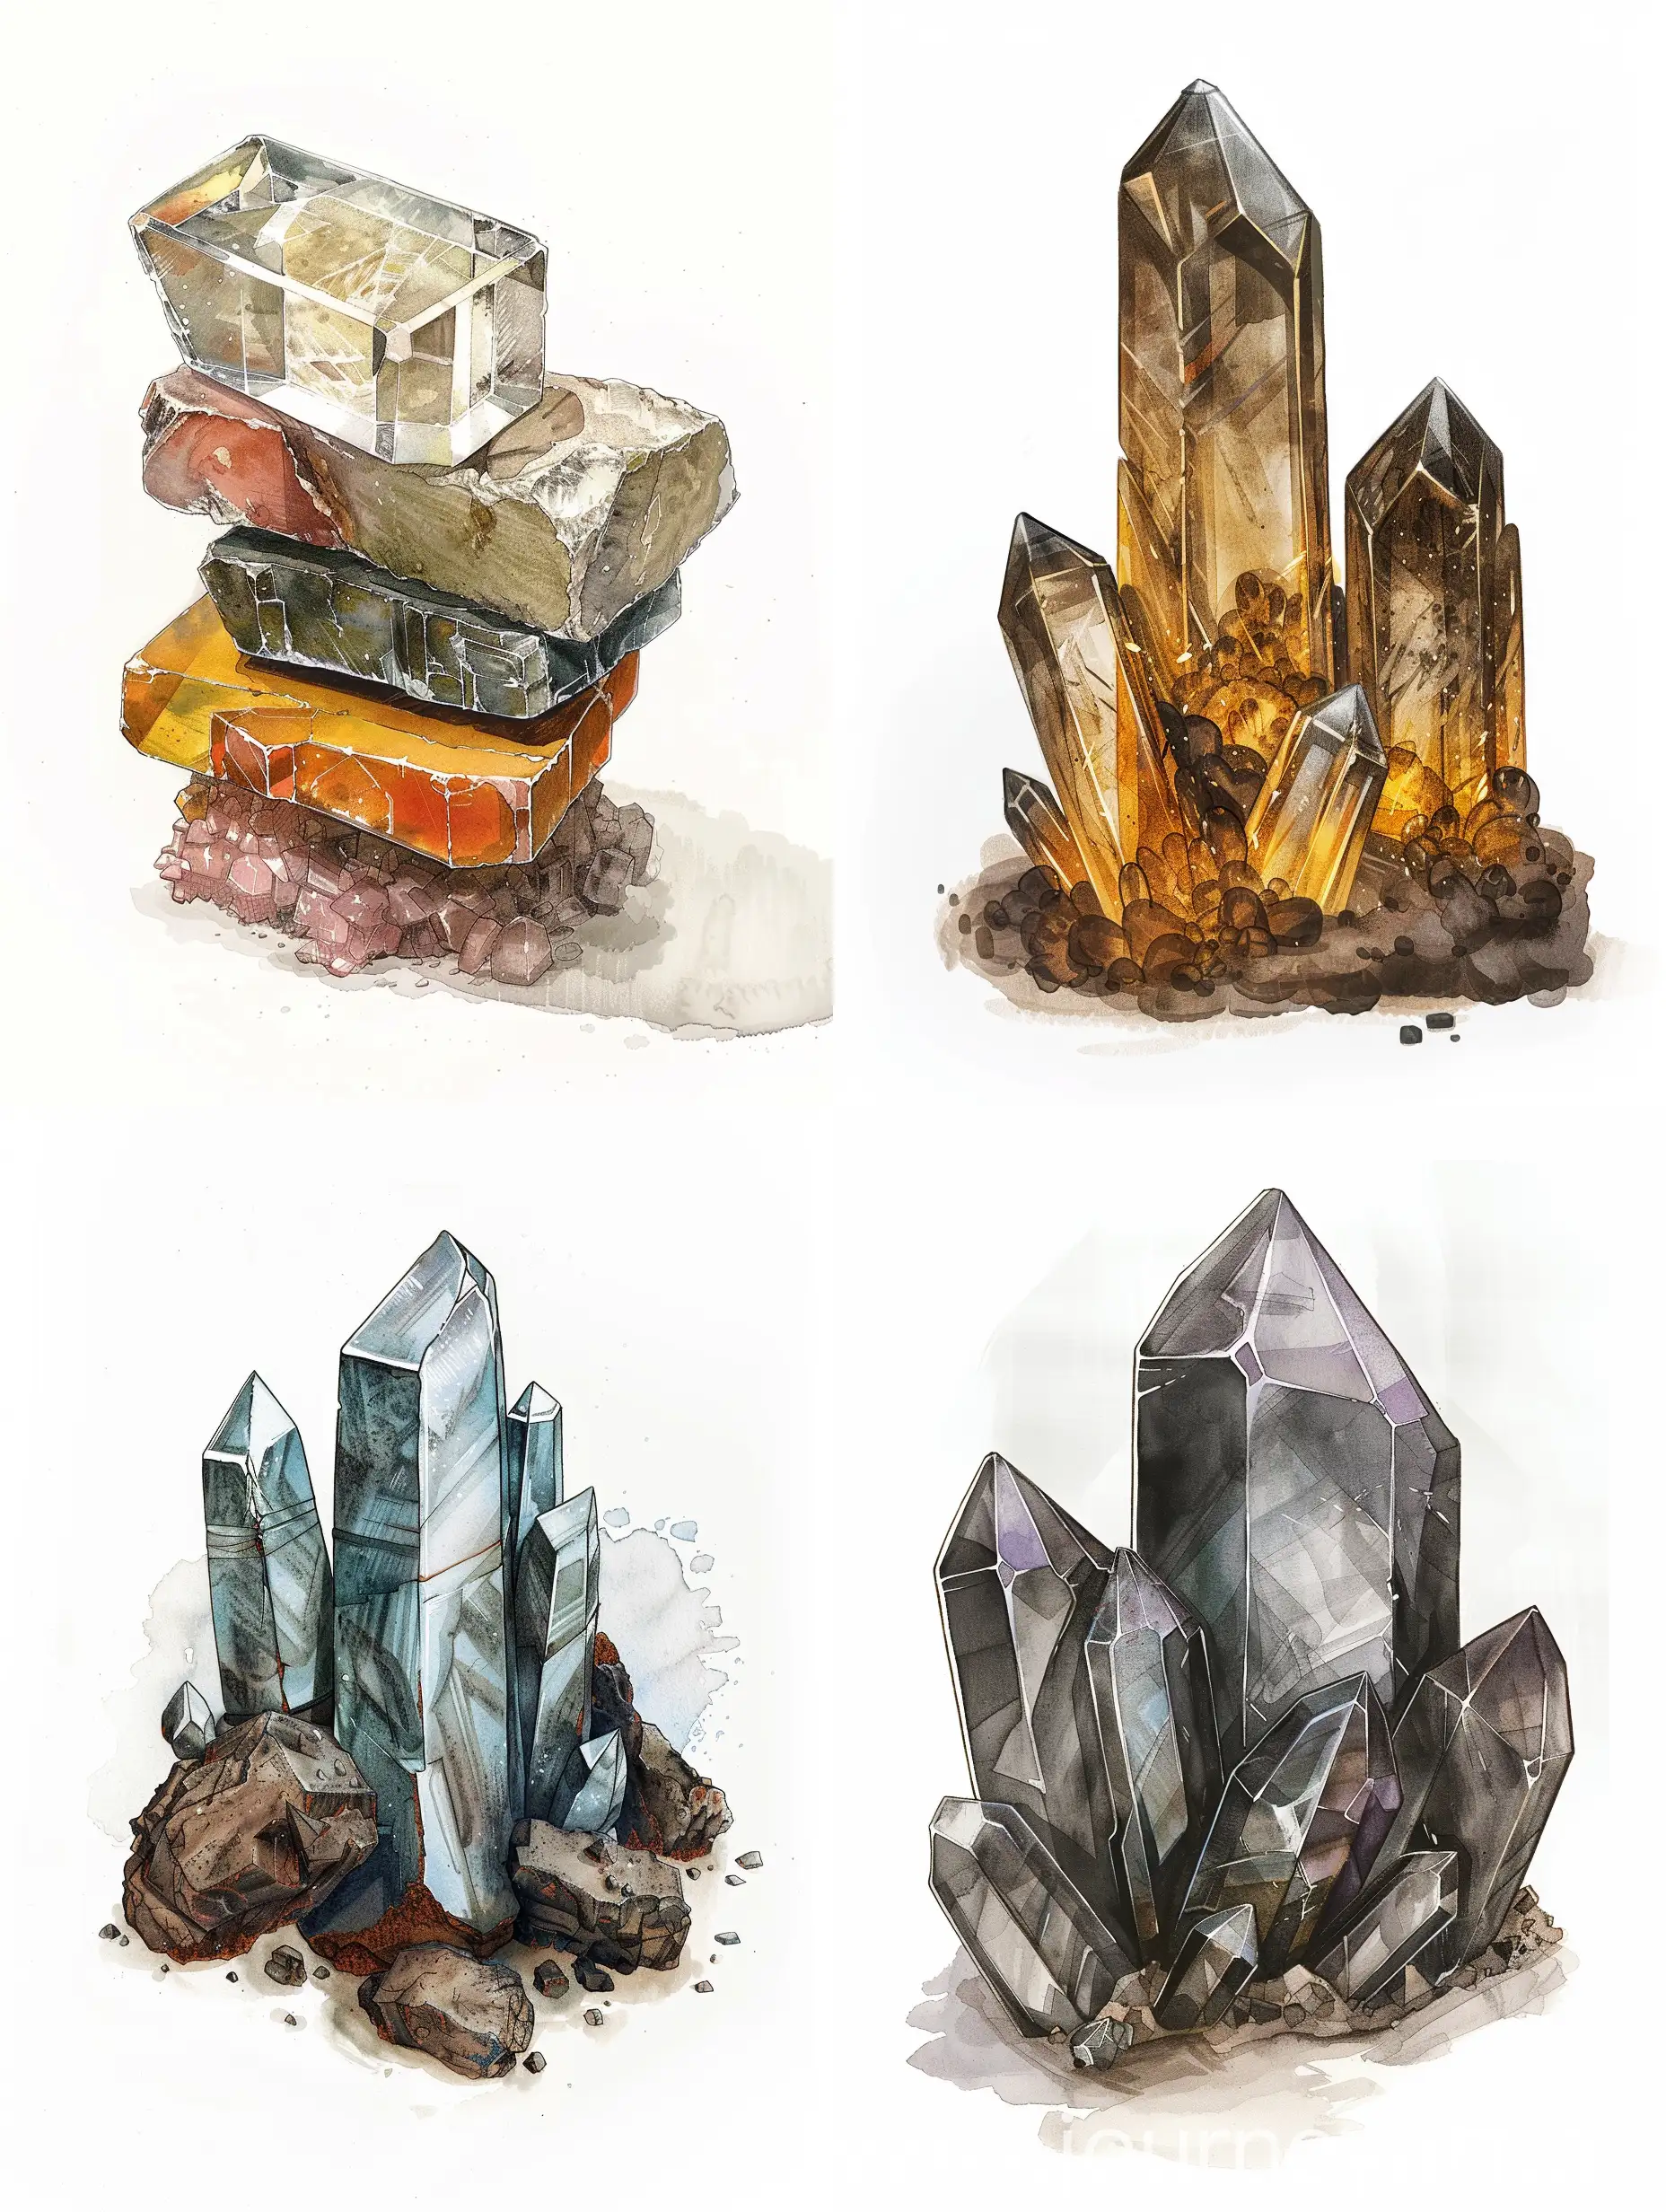 Antique small crystal stack, on a white background, illustration, Arthur Wrexham style